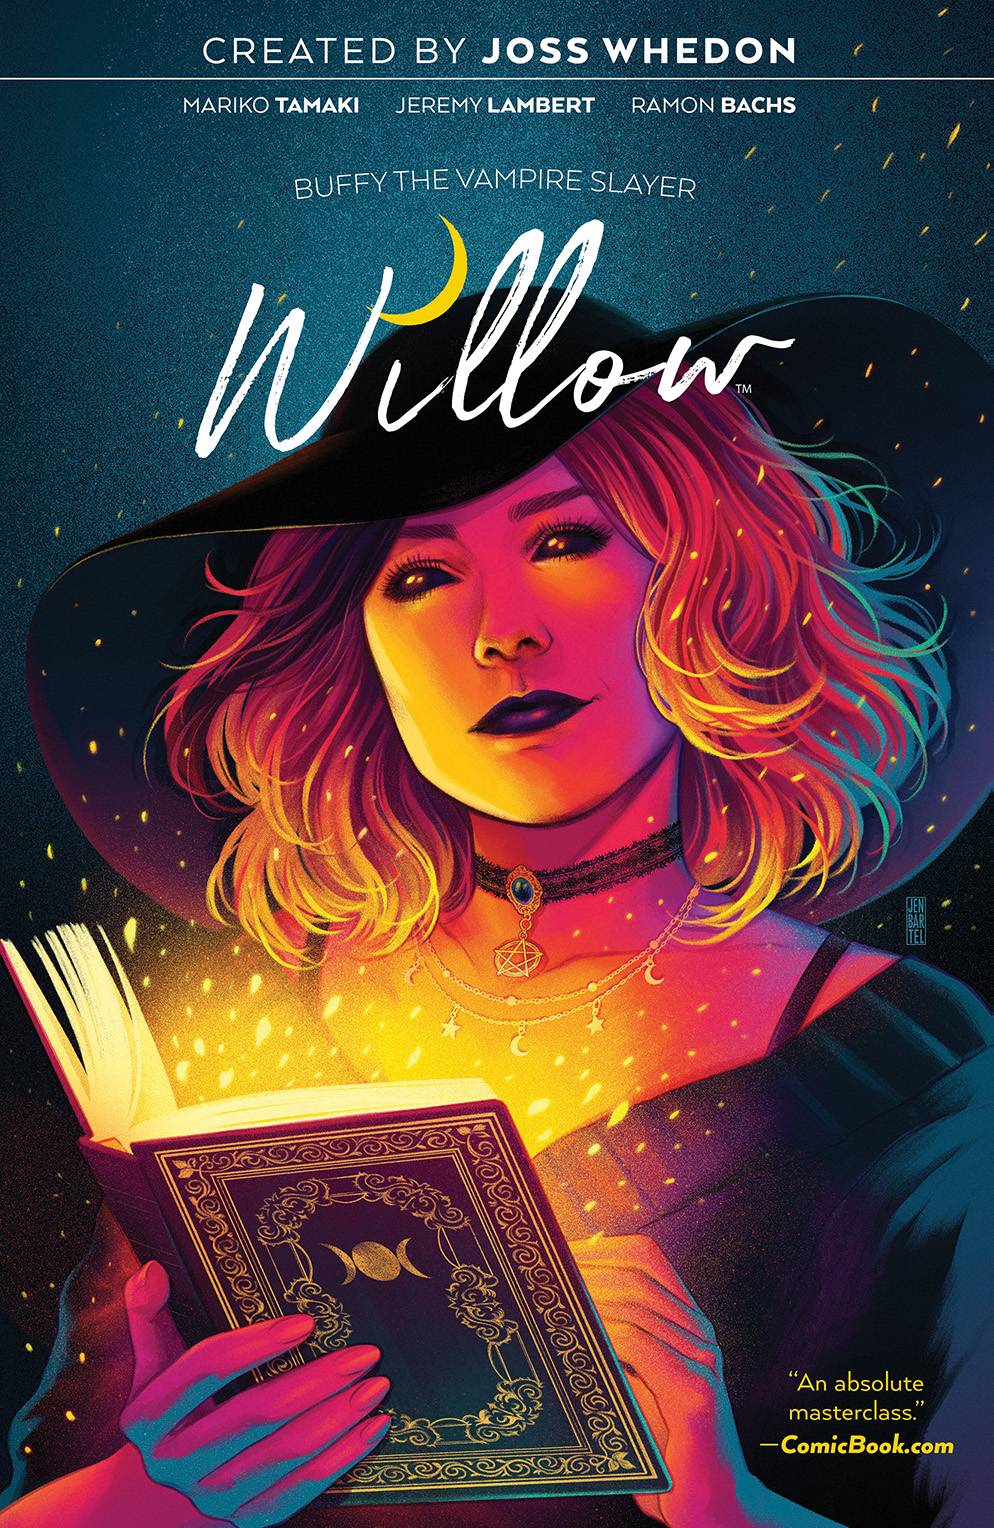 BUFFY THE VAMPIRE SLAYER WILLOW TP